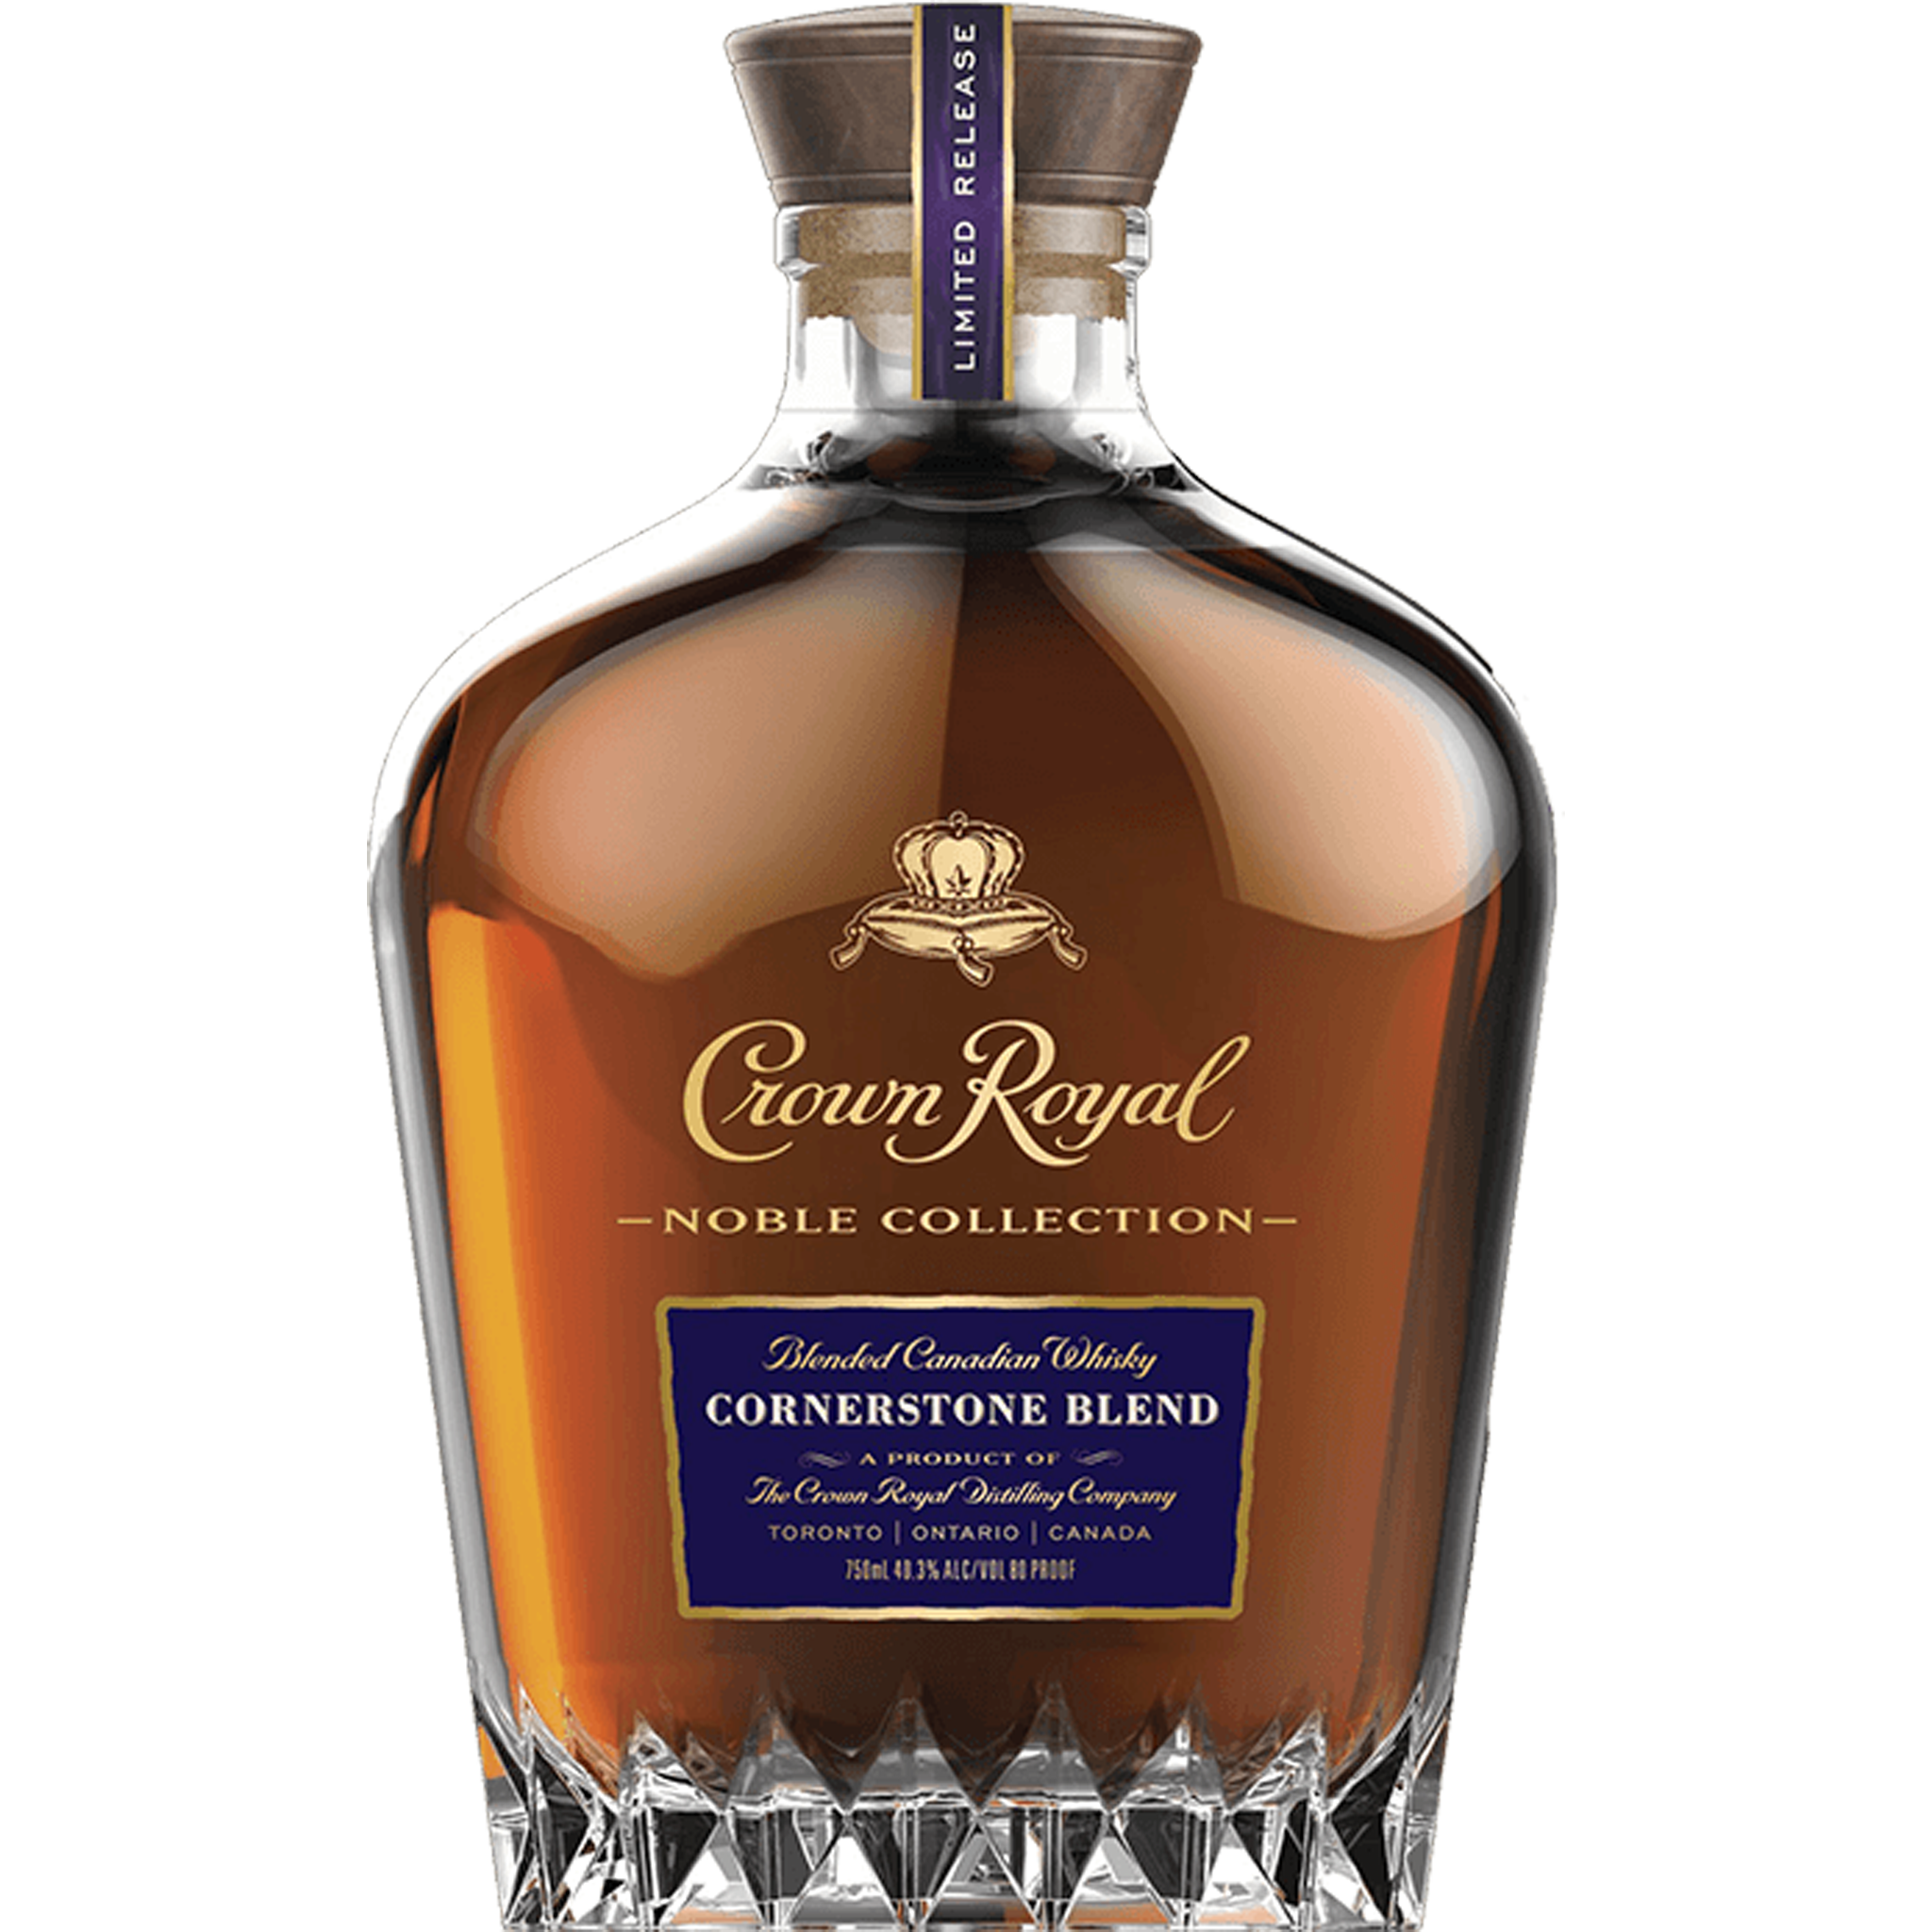 Crown Royal - Noble Collection Cornerstone Blend